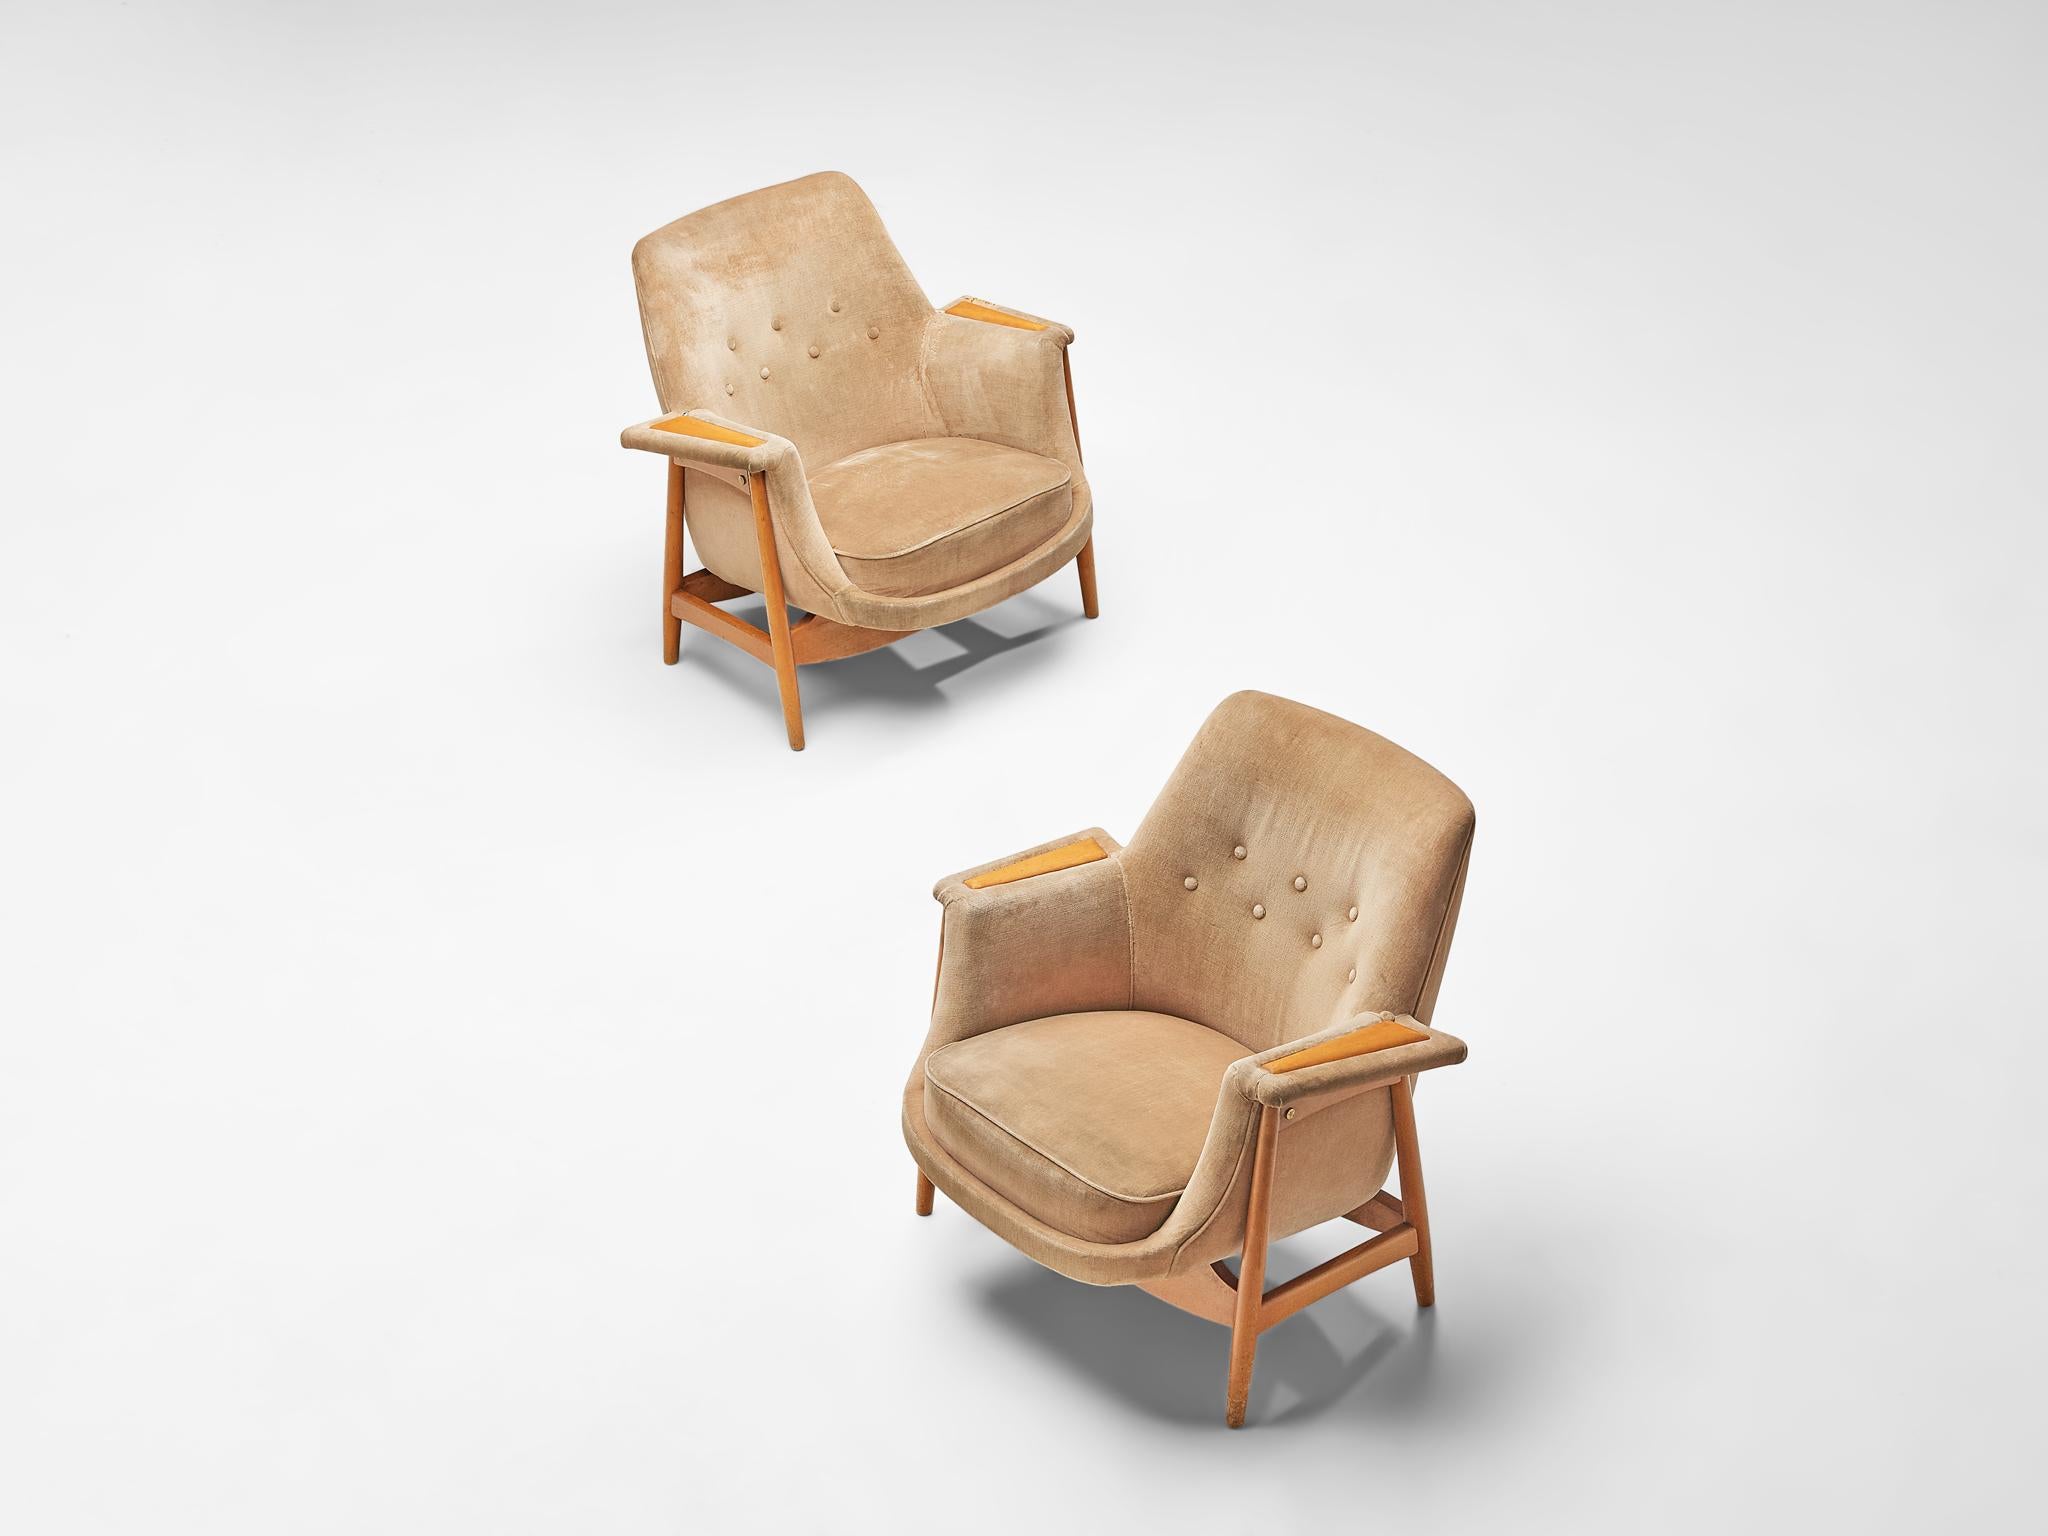 Pair of lounge chairs, oak and fabric upholstery, Europe, 1970s.

This elegant pair of lounge chairs feature an oakwood frame where the seat is placed in. The seat is adorned with a tufted back, with a beautiful oak detail on the armrests.  The legs